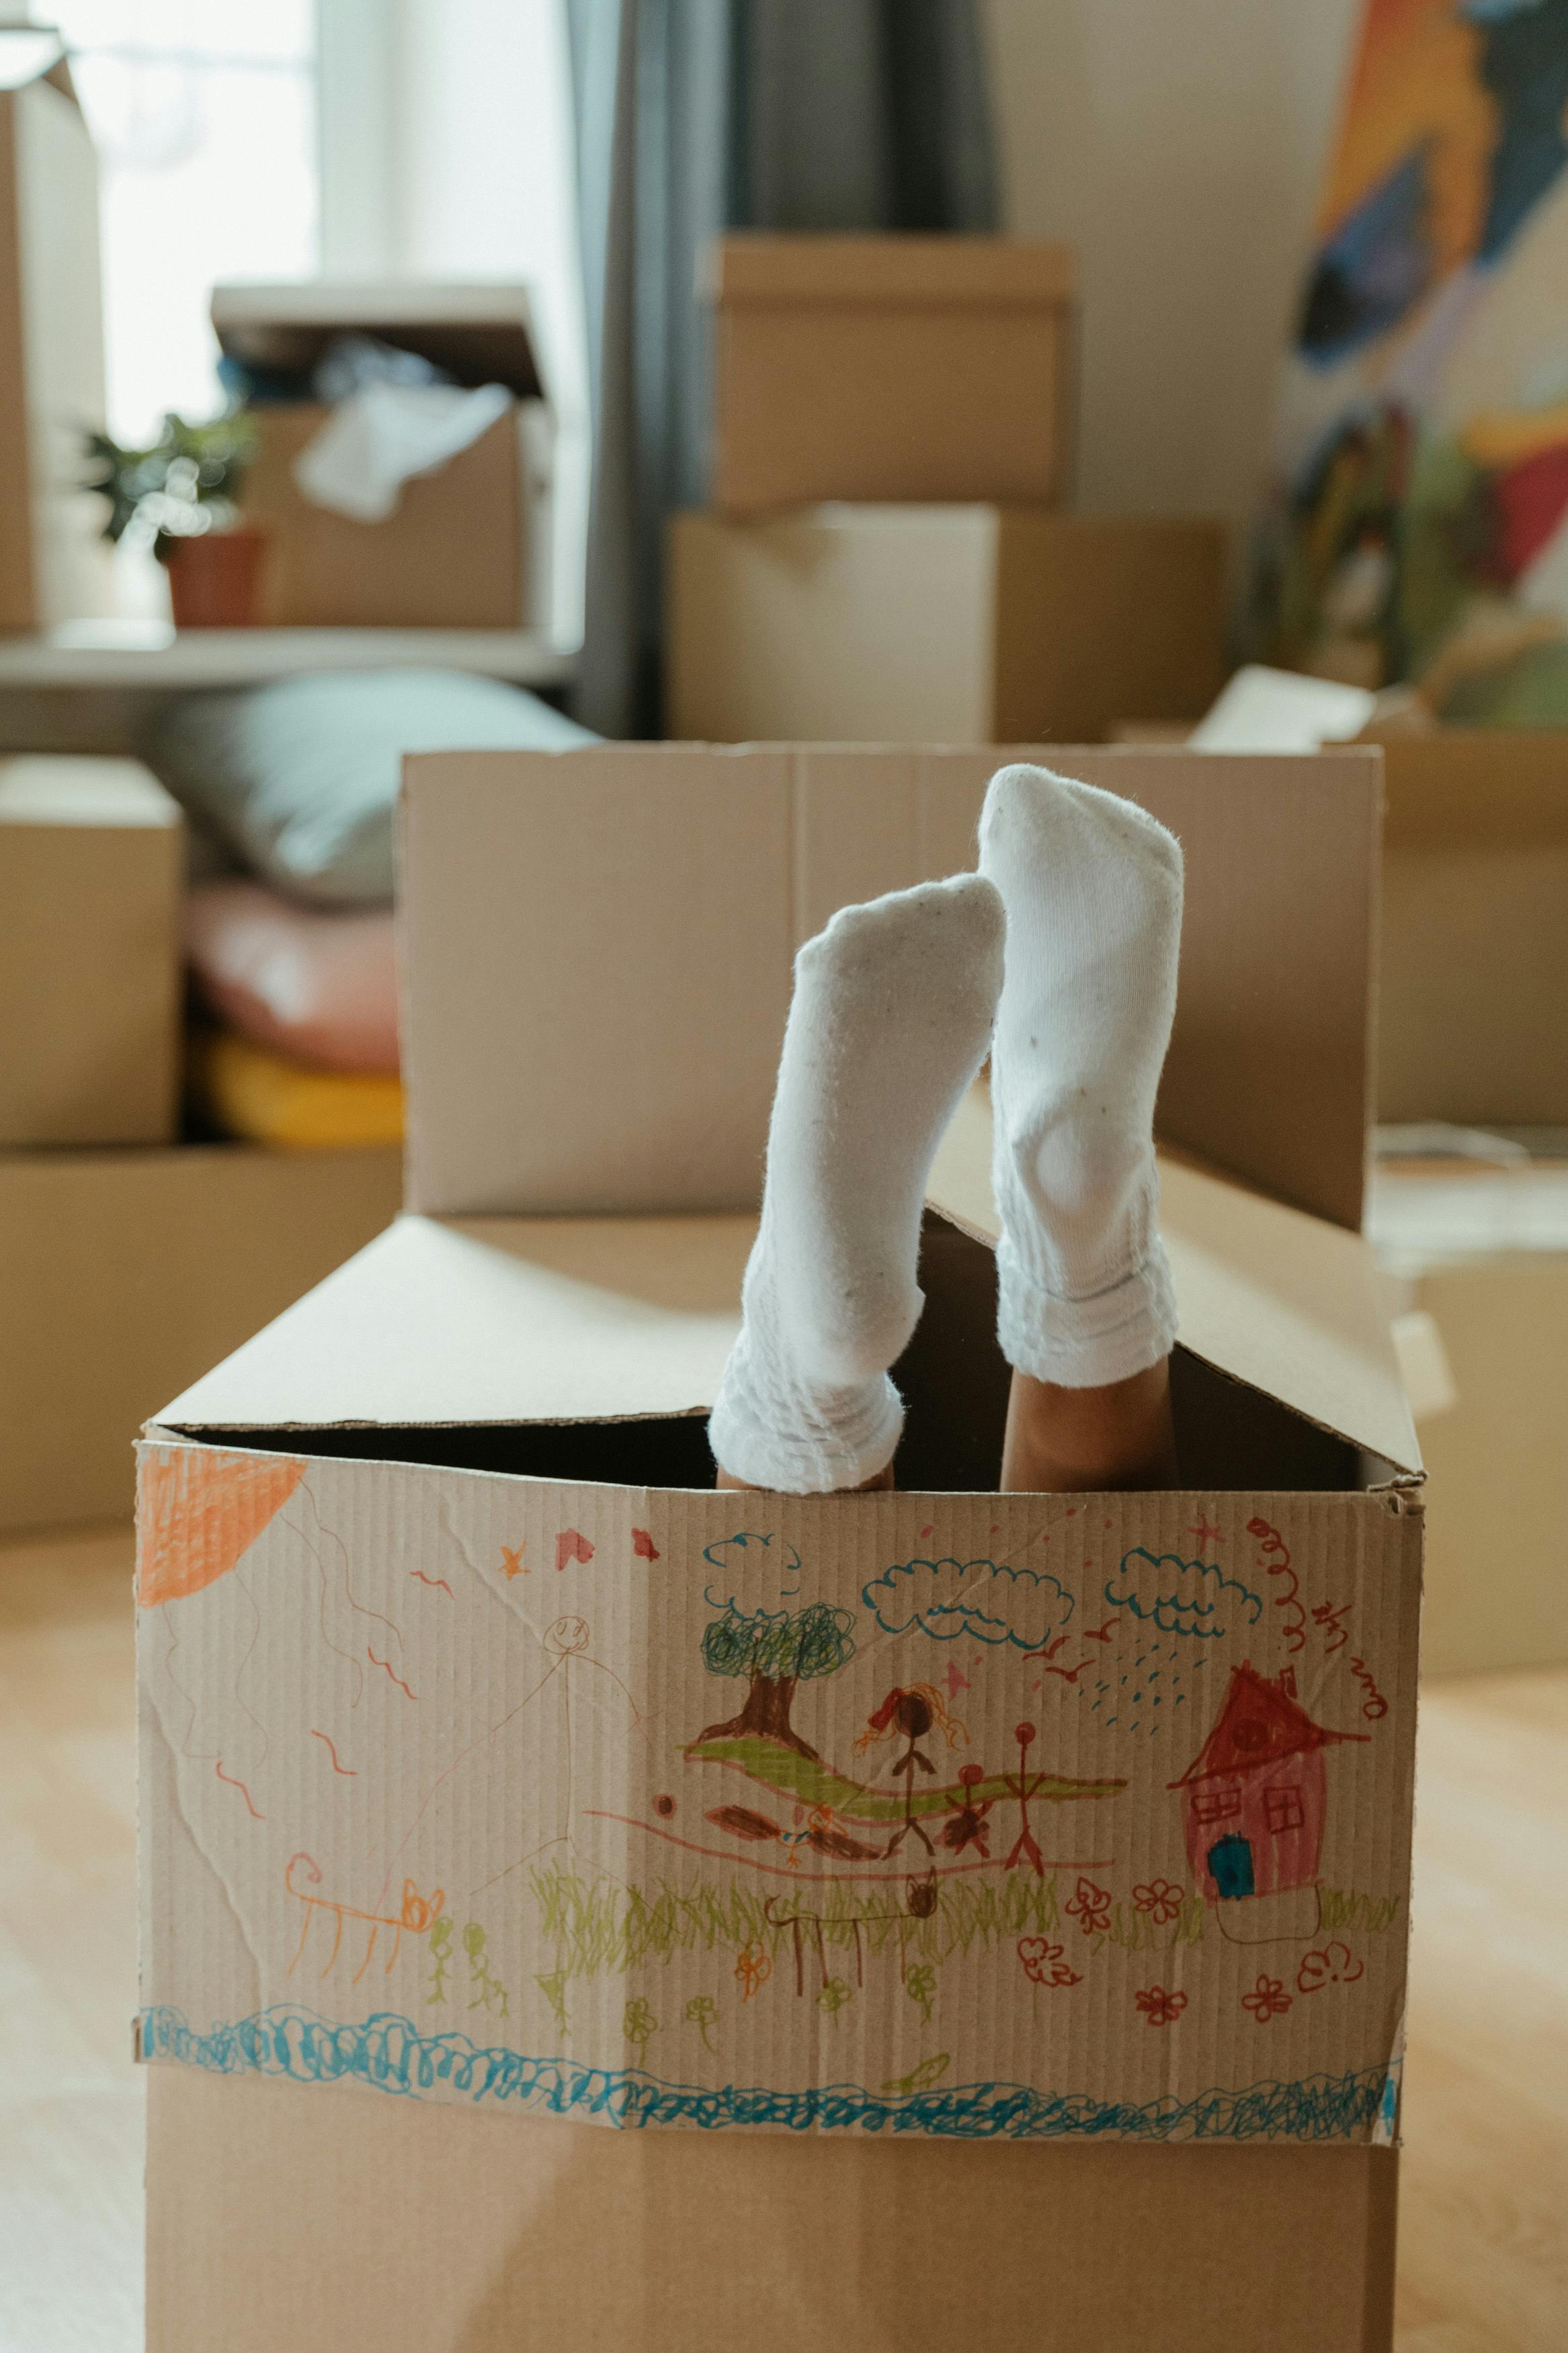 person in white socks standing on brown cardboard box